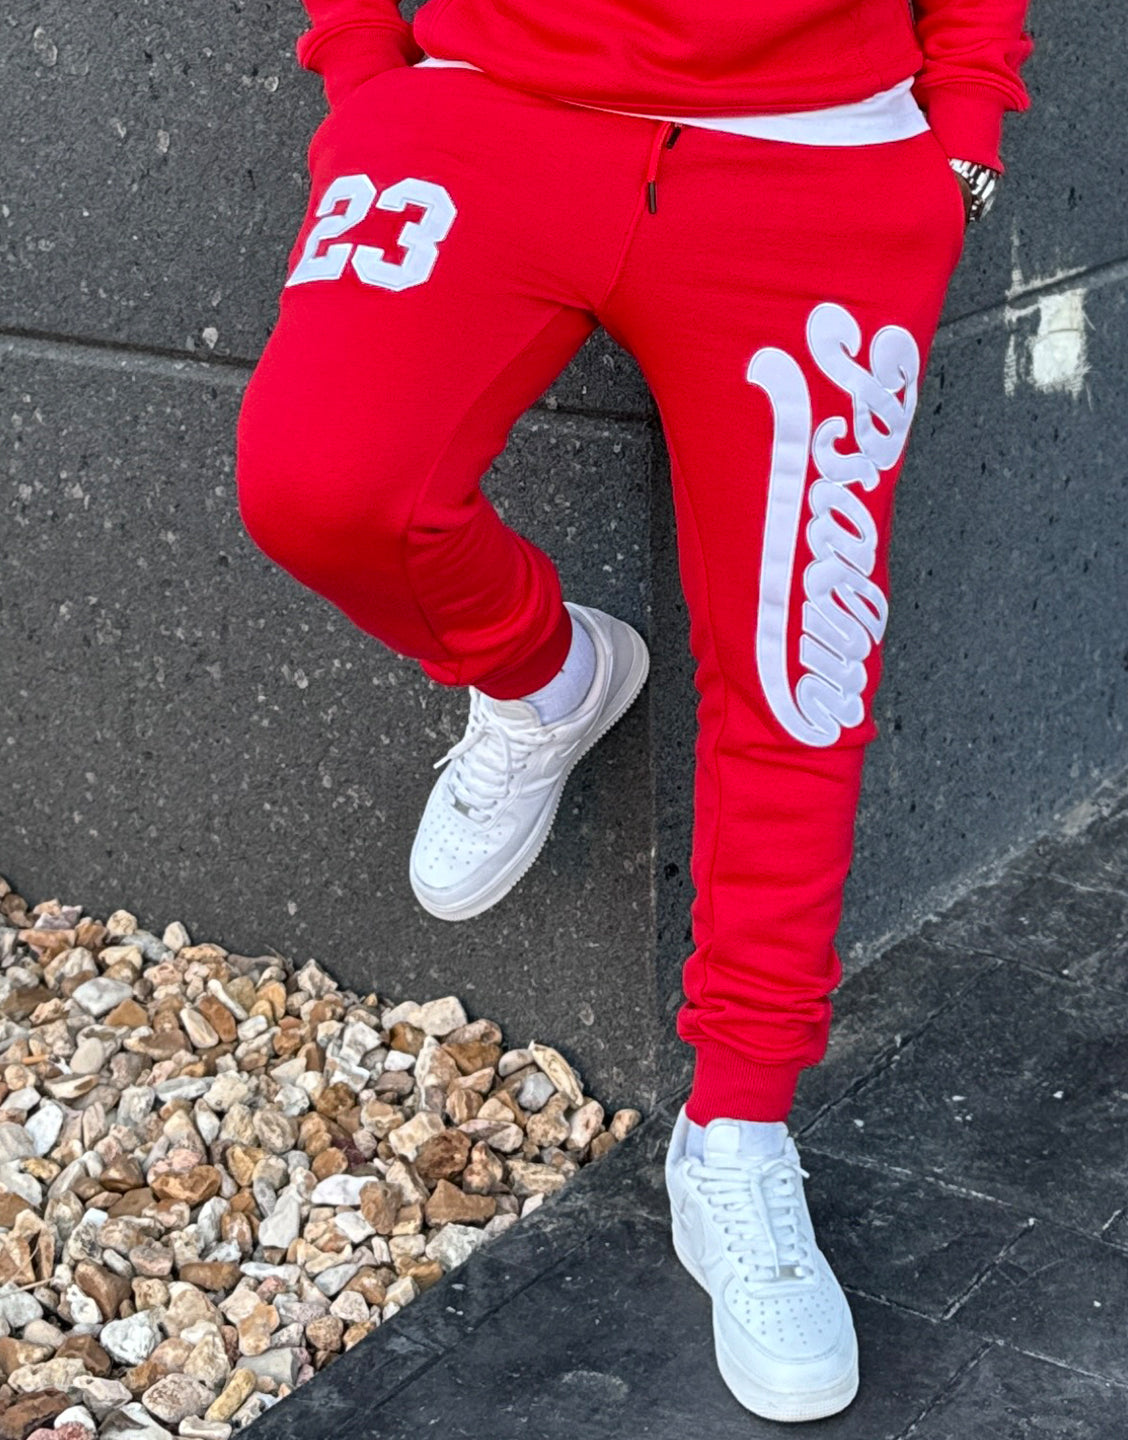 Psalm 23 JOGGER PANTS - RED